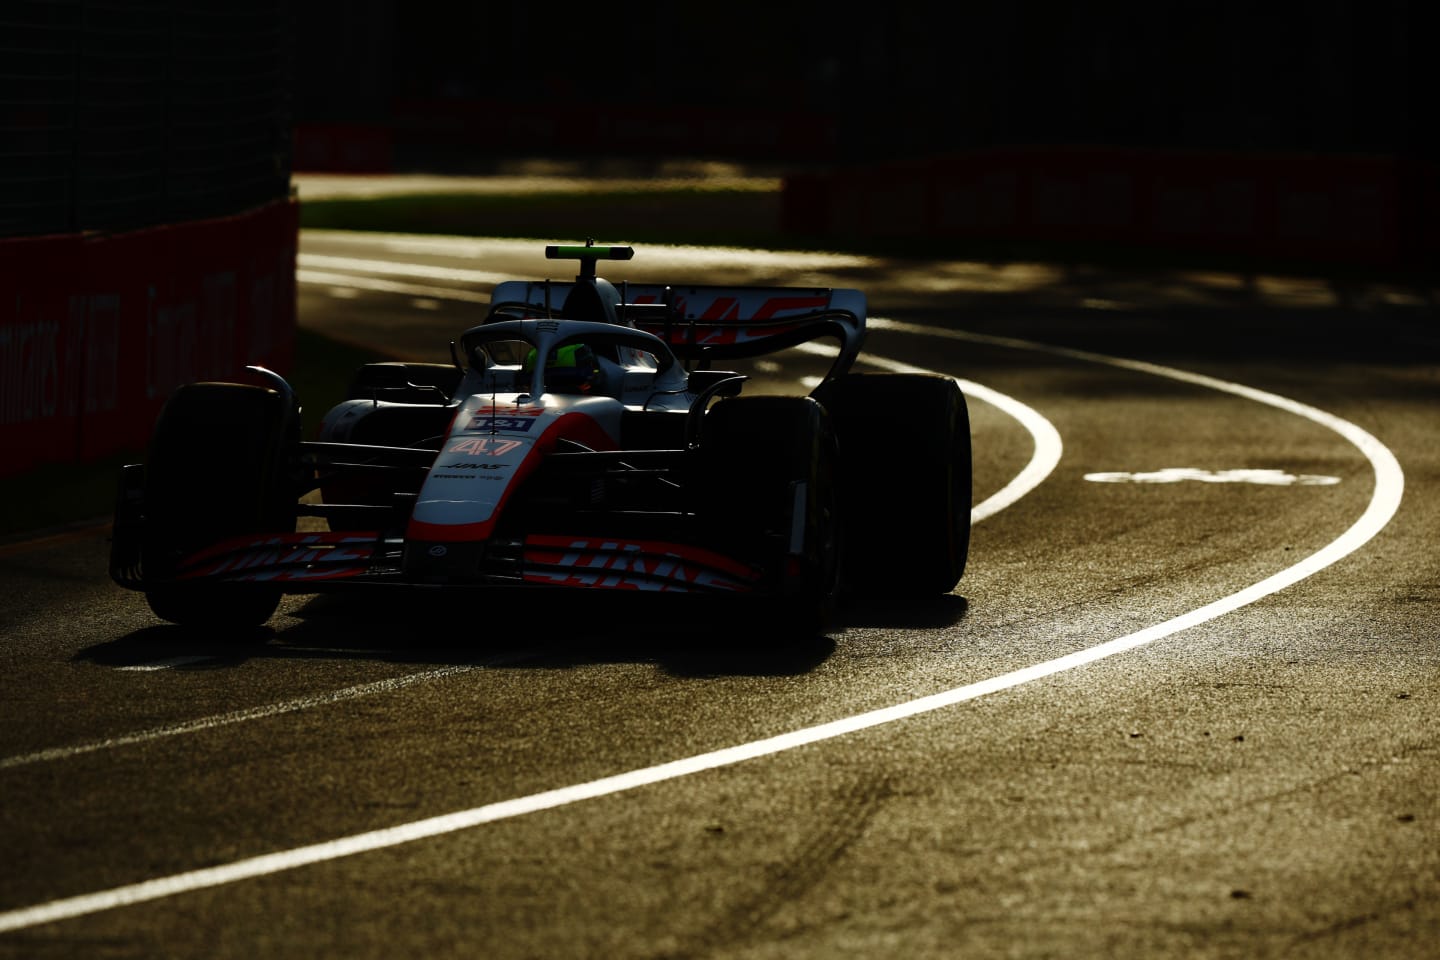 MELBOURNE, AUSTRALIA - APRIL 08: Mick Schumacher of Germany driving the (47) Haas F1 VF-22 Ferrari on track during practice ahead of the F1 Grand Prix of Australia at Melbourne Grand Prix Circuit on April 08, 2022 in Melbourne, Australia. (Photo by Mark Thompson/Getty Images)